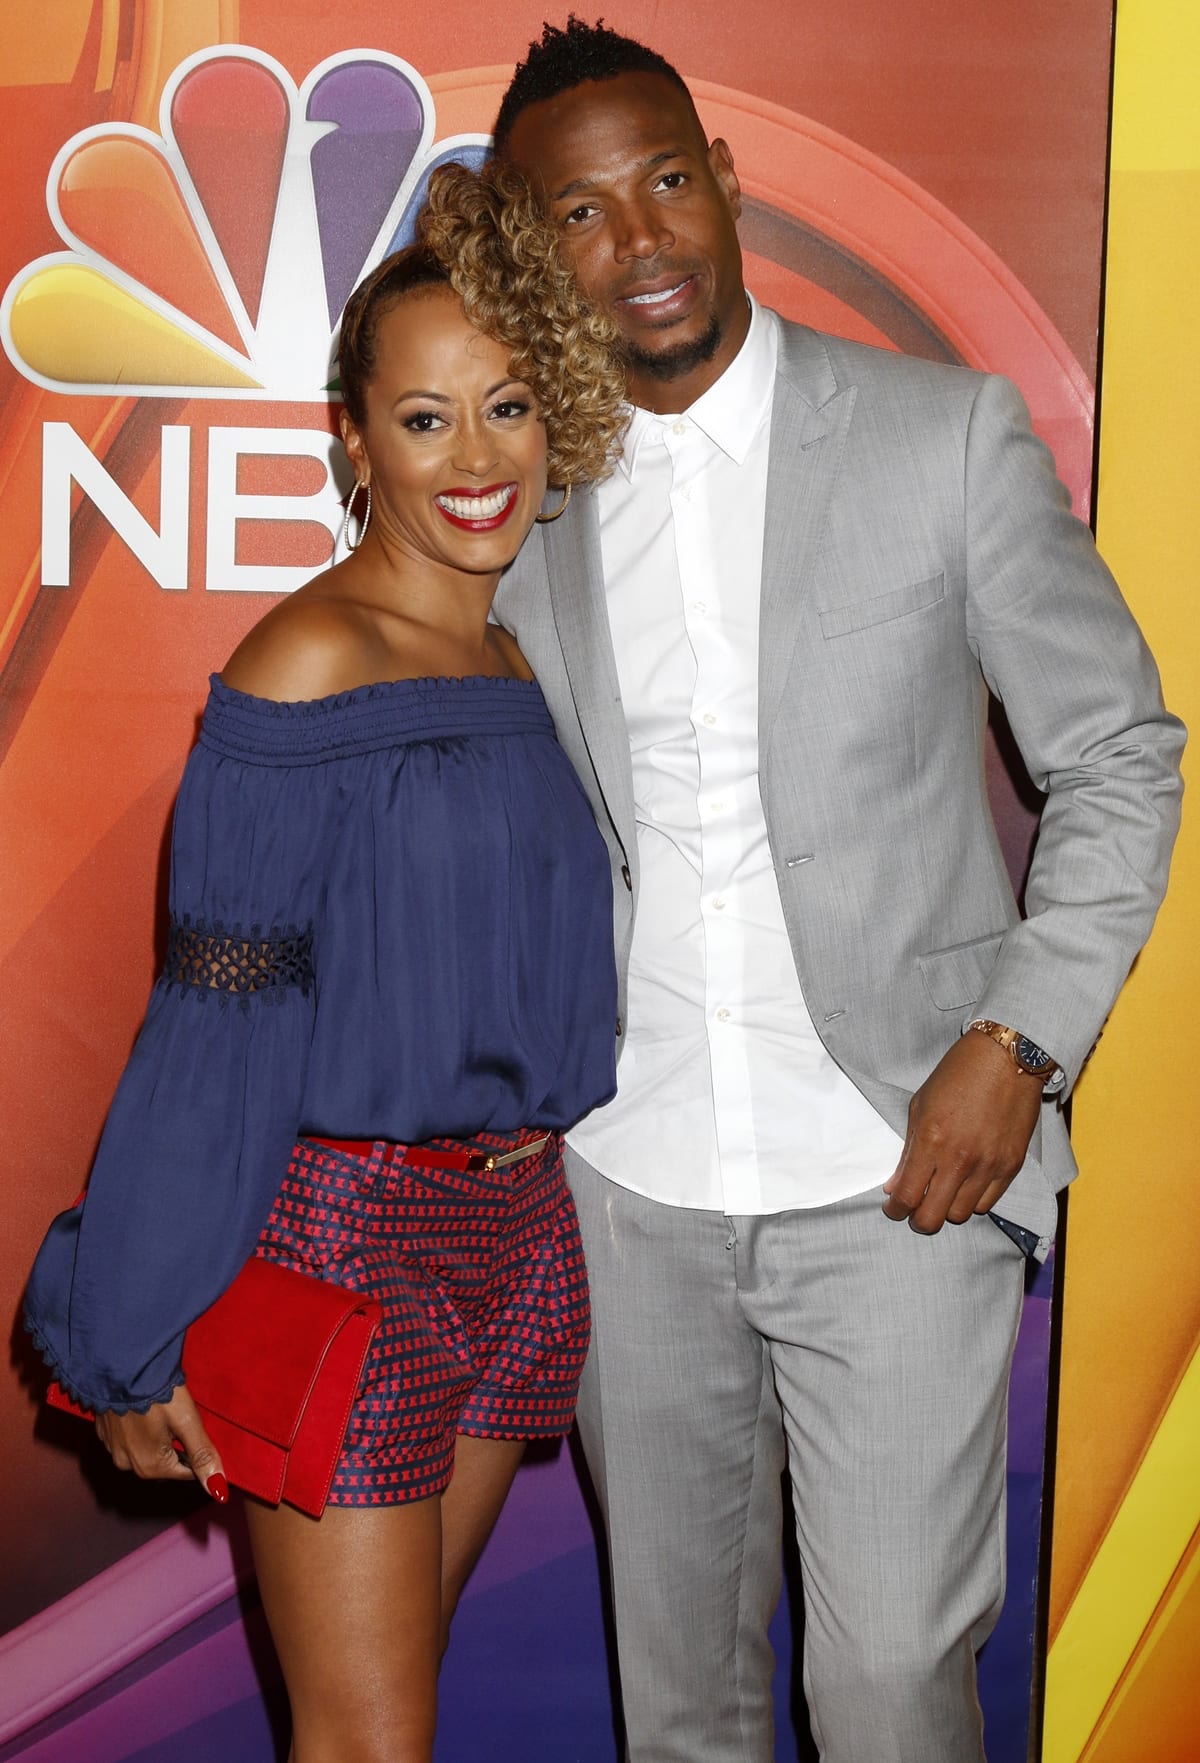 Marlon Wayans has been rumored to be dating his good friend Essence Atkins